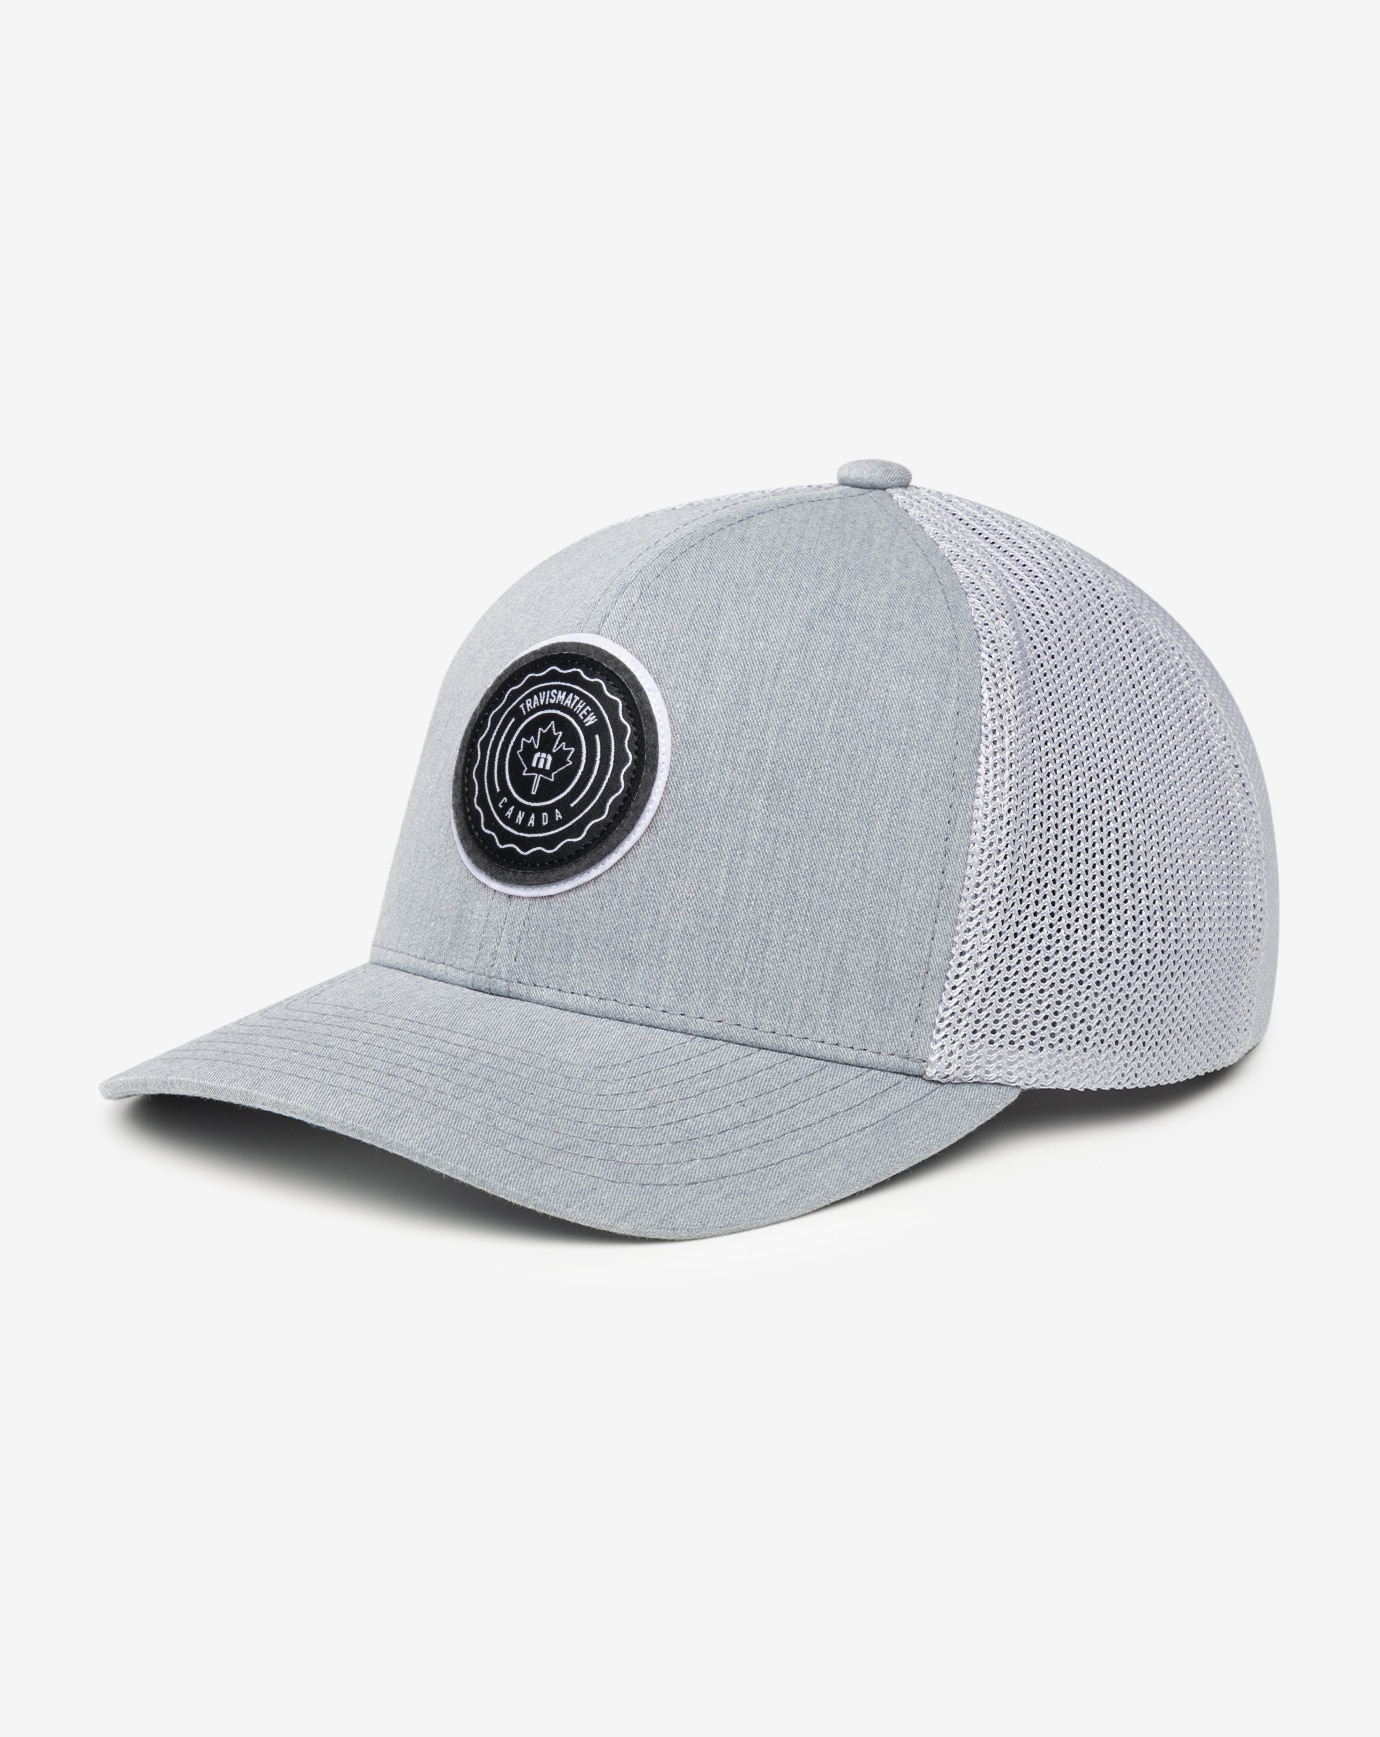 CAN PATCH SNAPBACK HAT Image Thumbnail 2